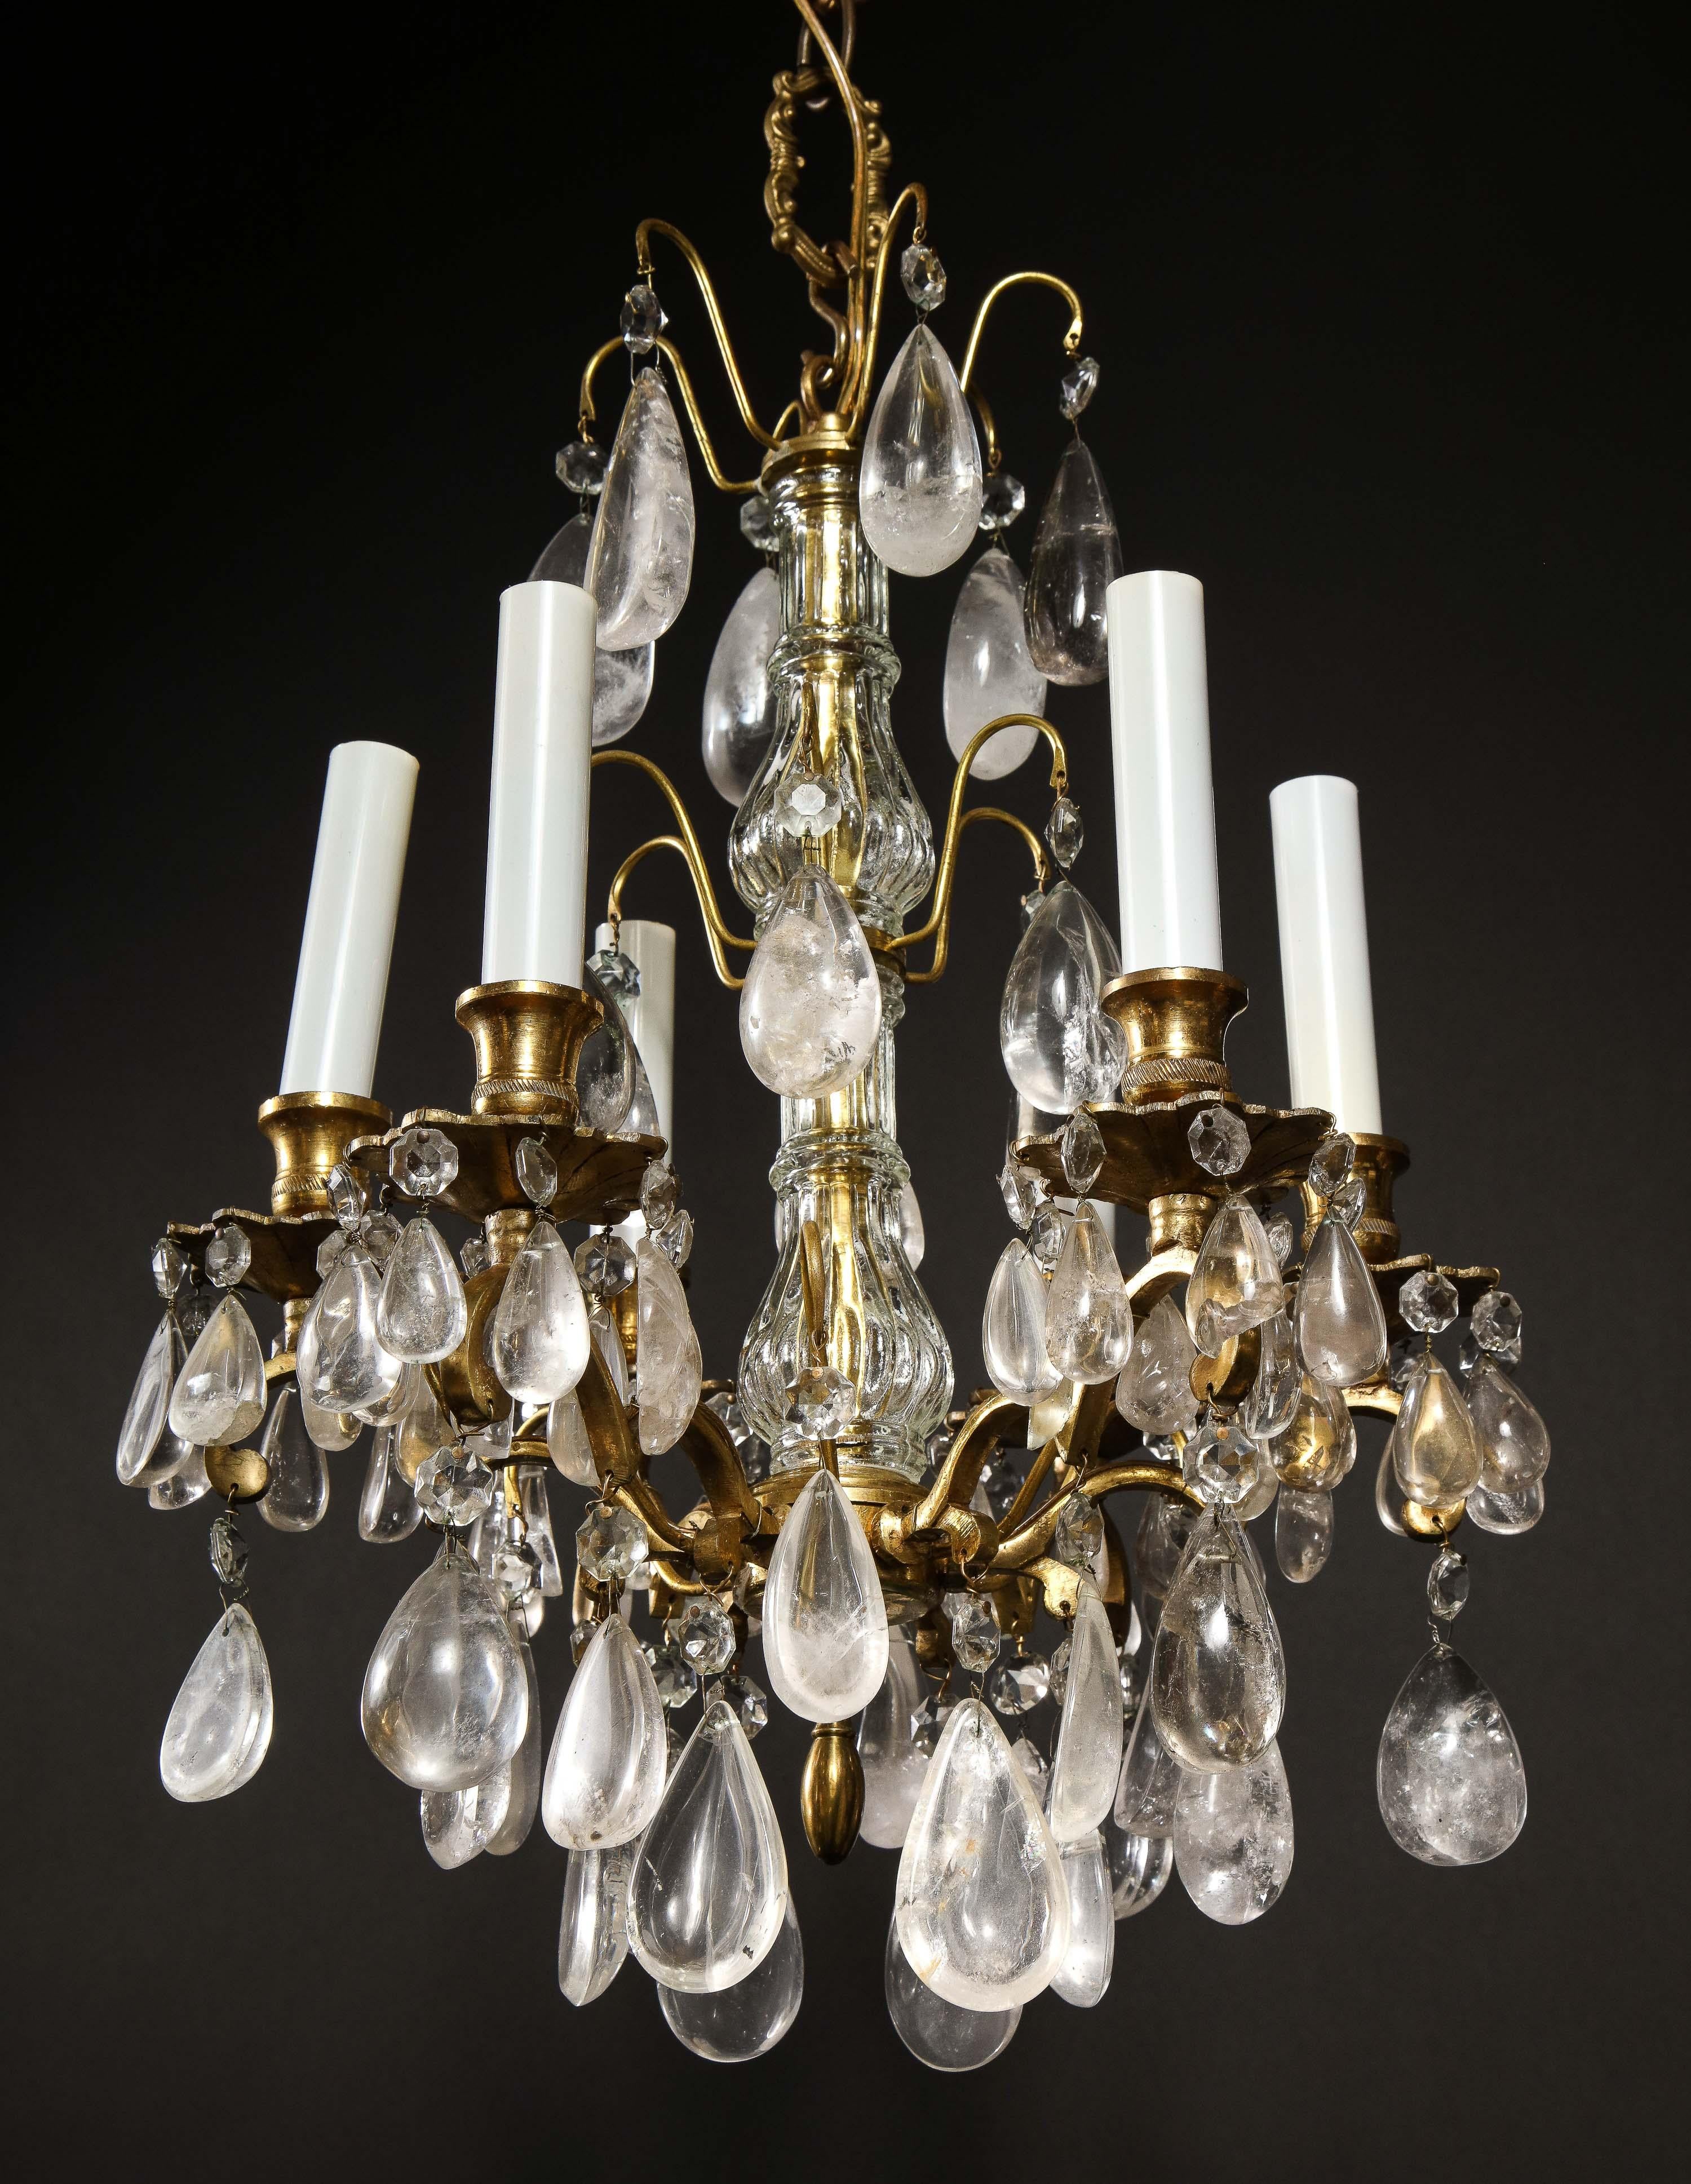 Pair of Fine Continental Louis XVI Style Rock Crystal Chandeliers 1